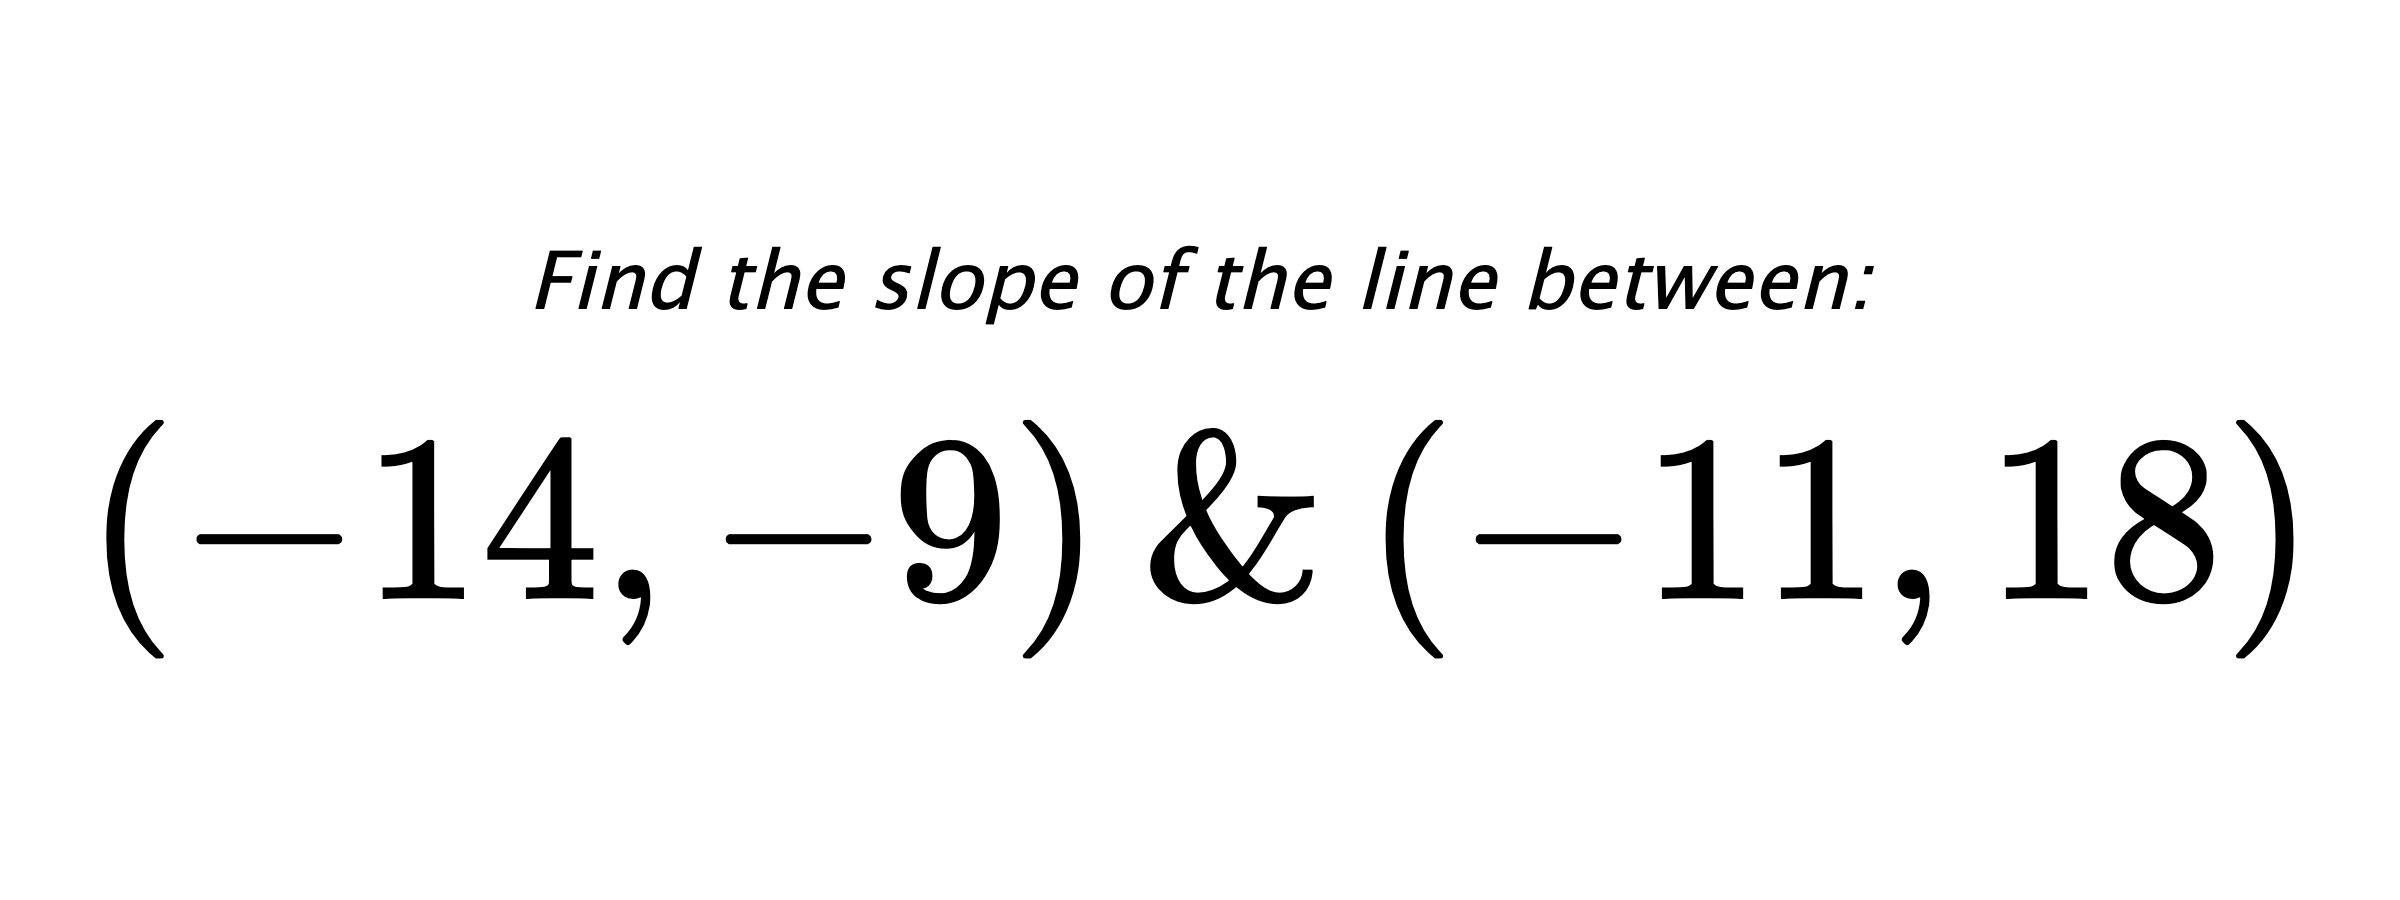 Find the slope of the line between: $ (-14,-9) \hspace{0.5cm} \text{&} \hspace{0.5cm} (-11,18) $